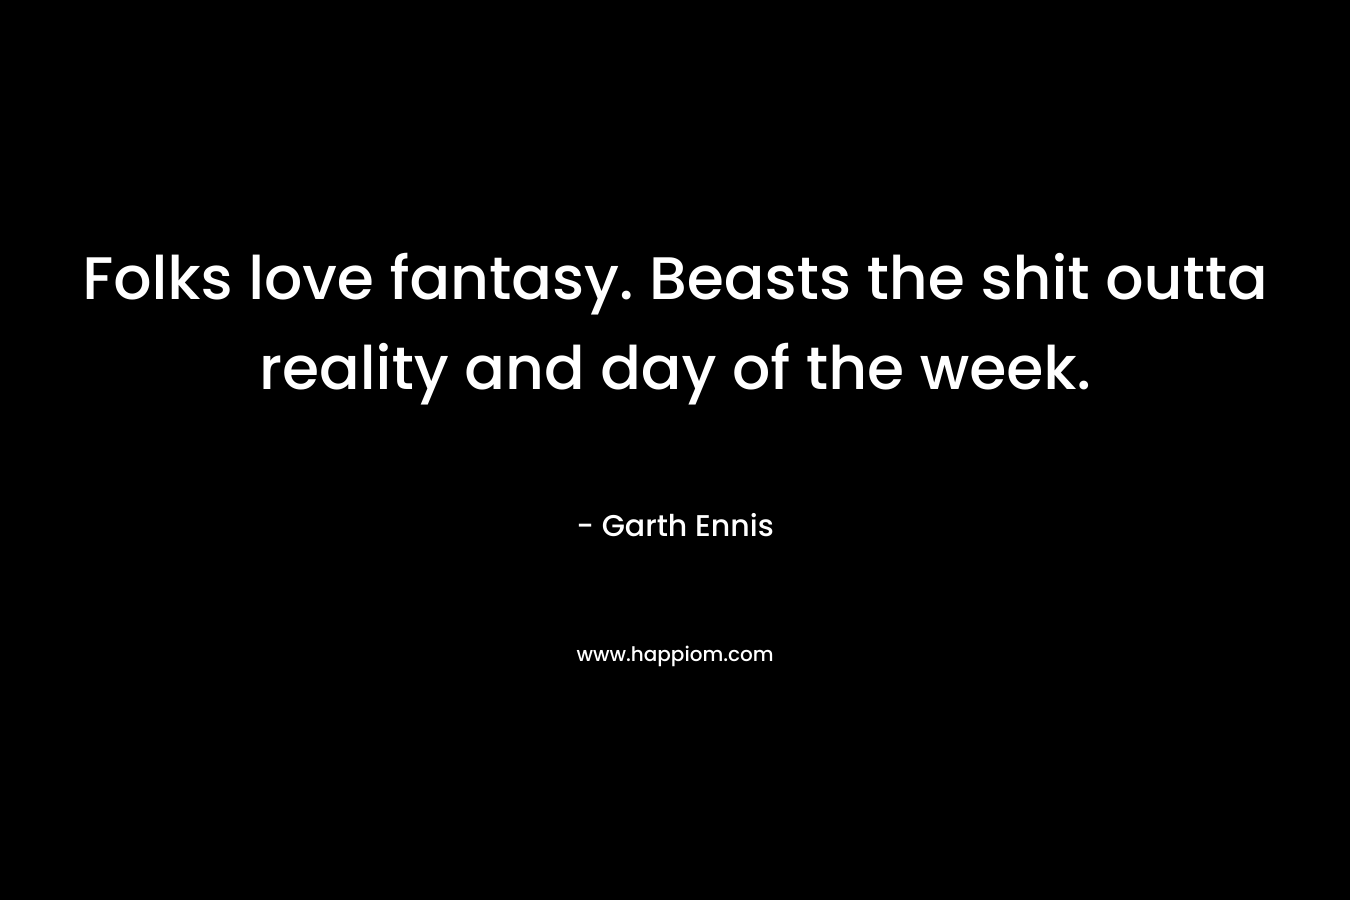 Folks love fantasy. Beasts the shit outta reality and day of the week. – Garth Ennis